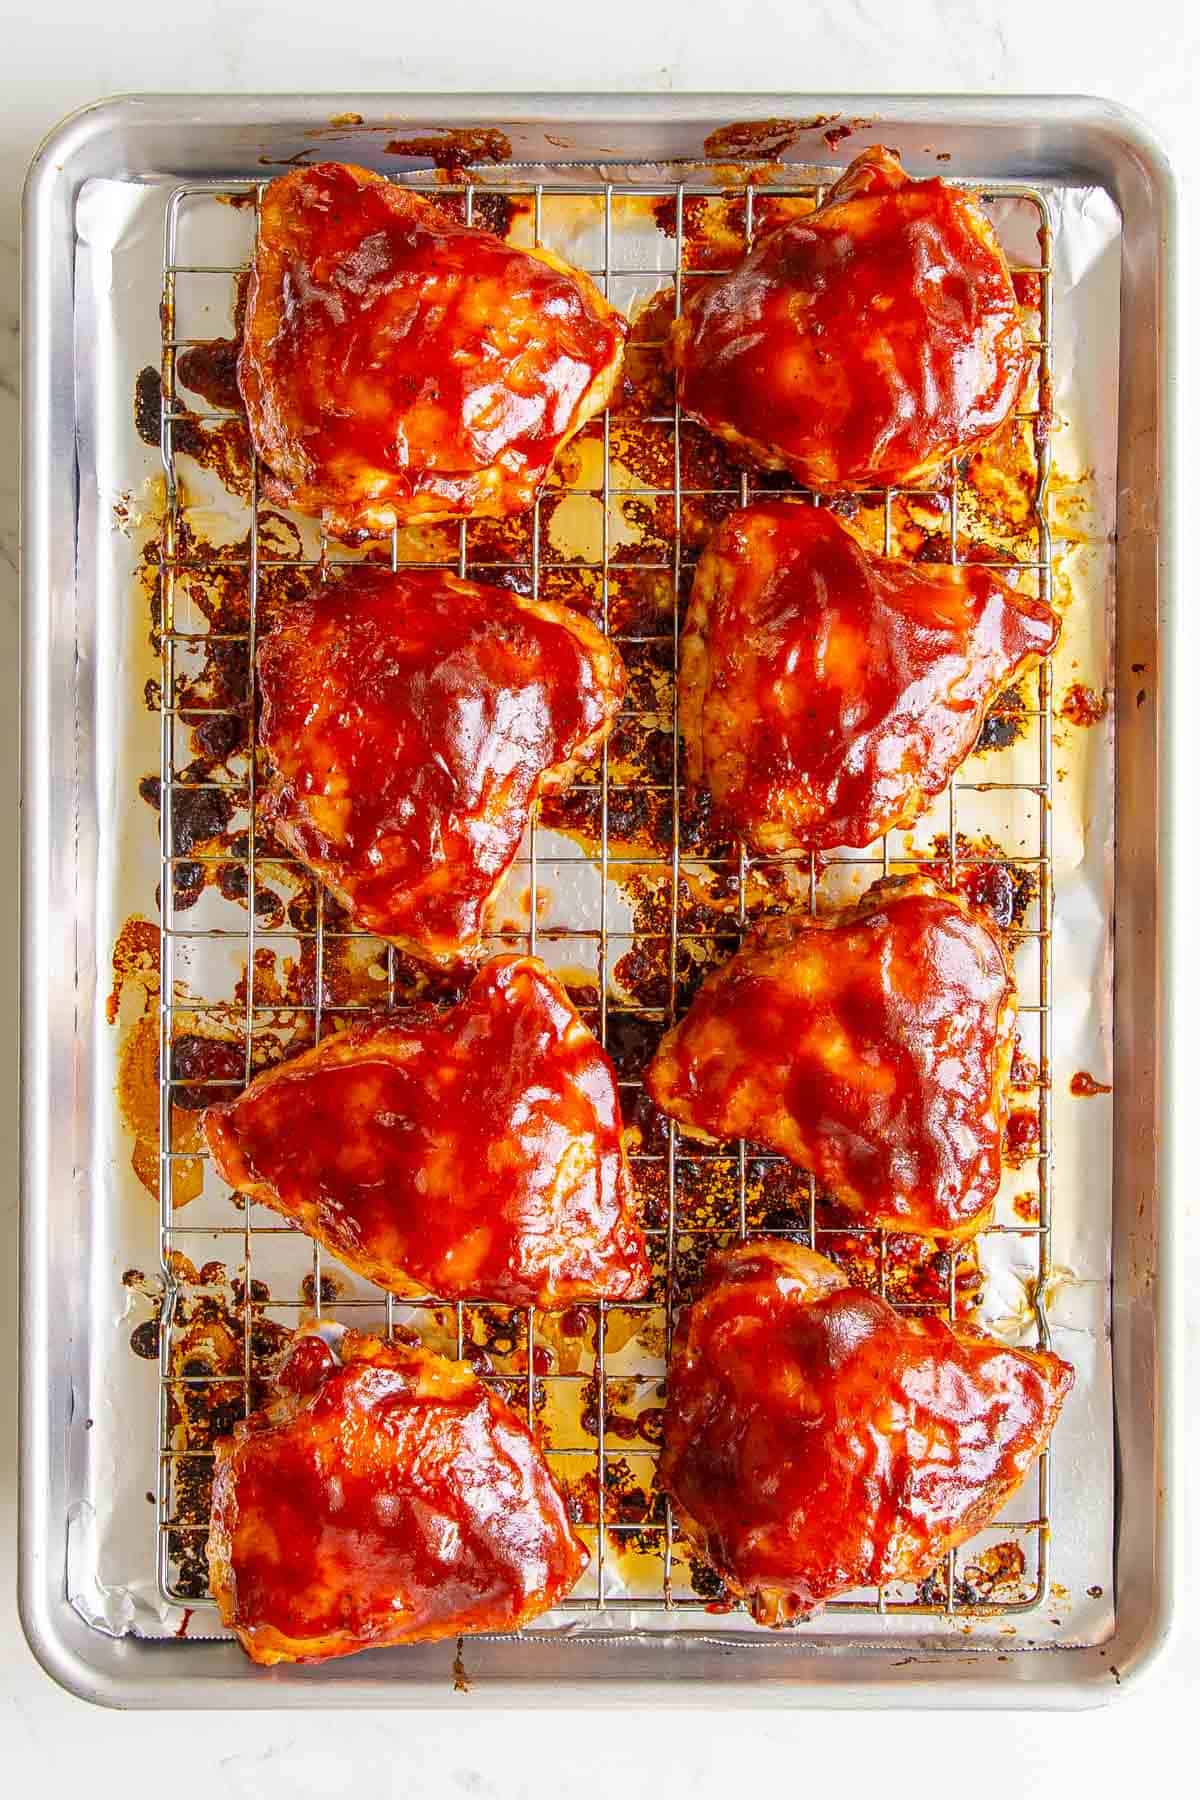 Overhead view of baked BBQ chicken thighs on a wire rack in a baking sheet.